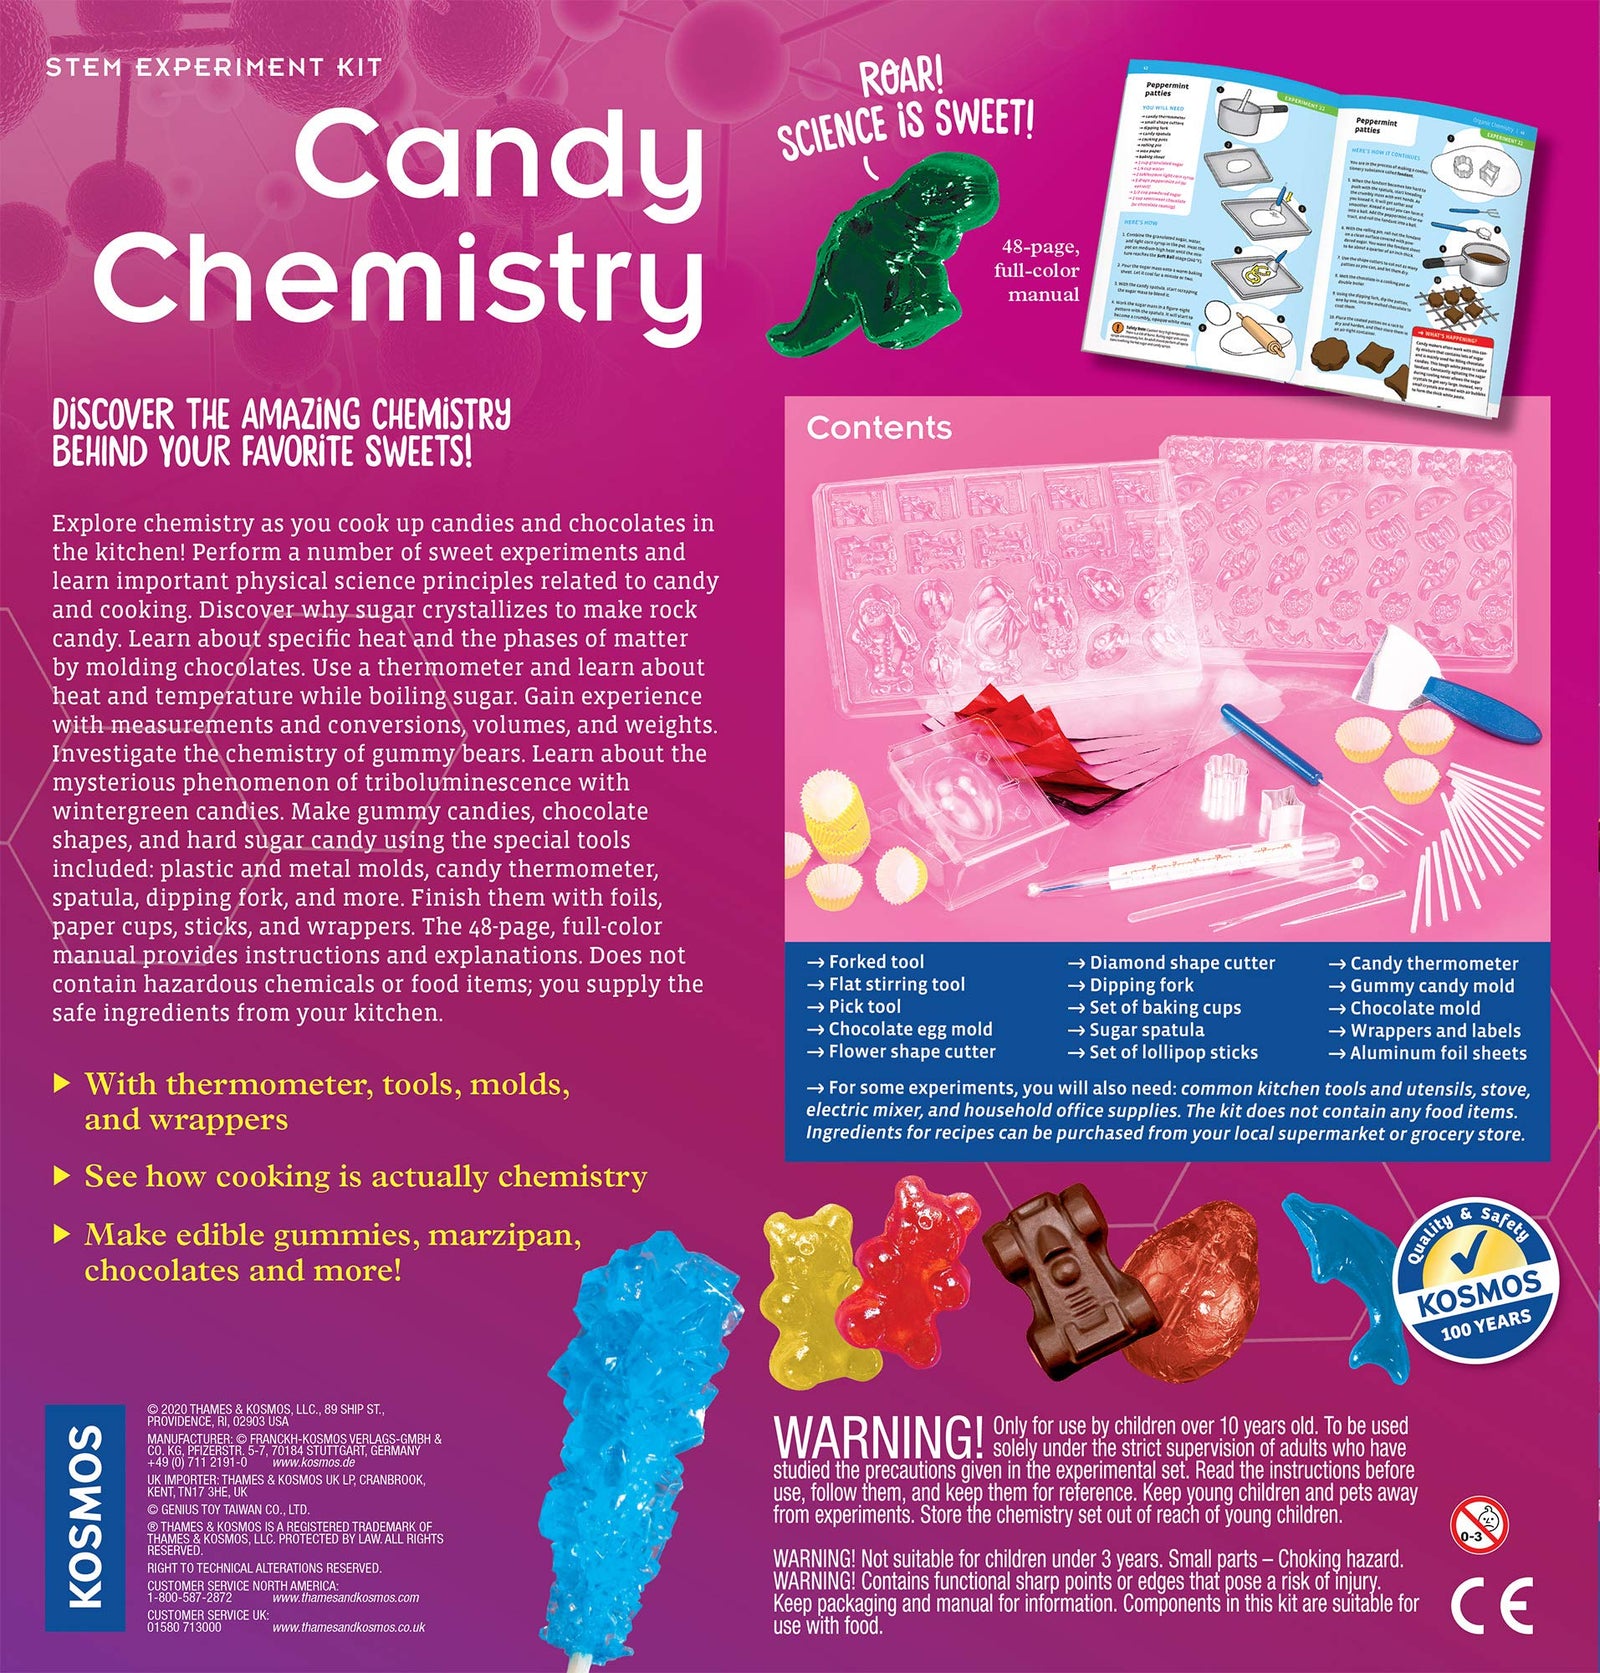 Thames & Kosmos Candy Chemistry | Science Kit | Rock Candy, Chocolates, Gummy Bears, Wintergreen Candies | 48 Page Full-Color Manual | Ages 10+ | Learn Chemistry, Have Fun | Cooking Science